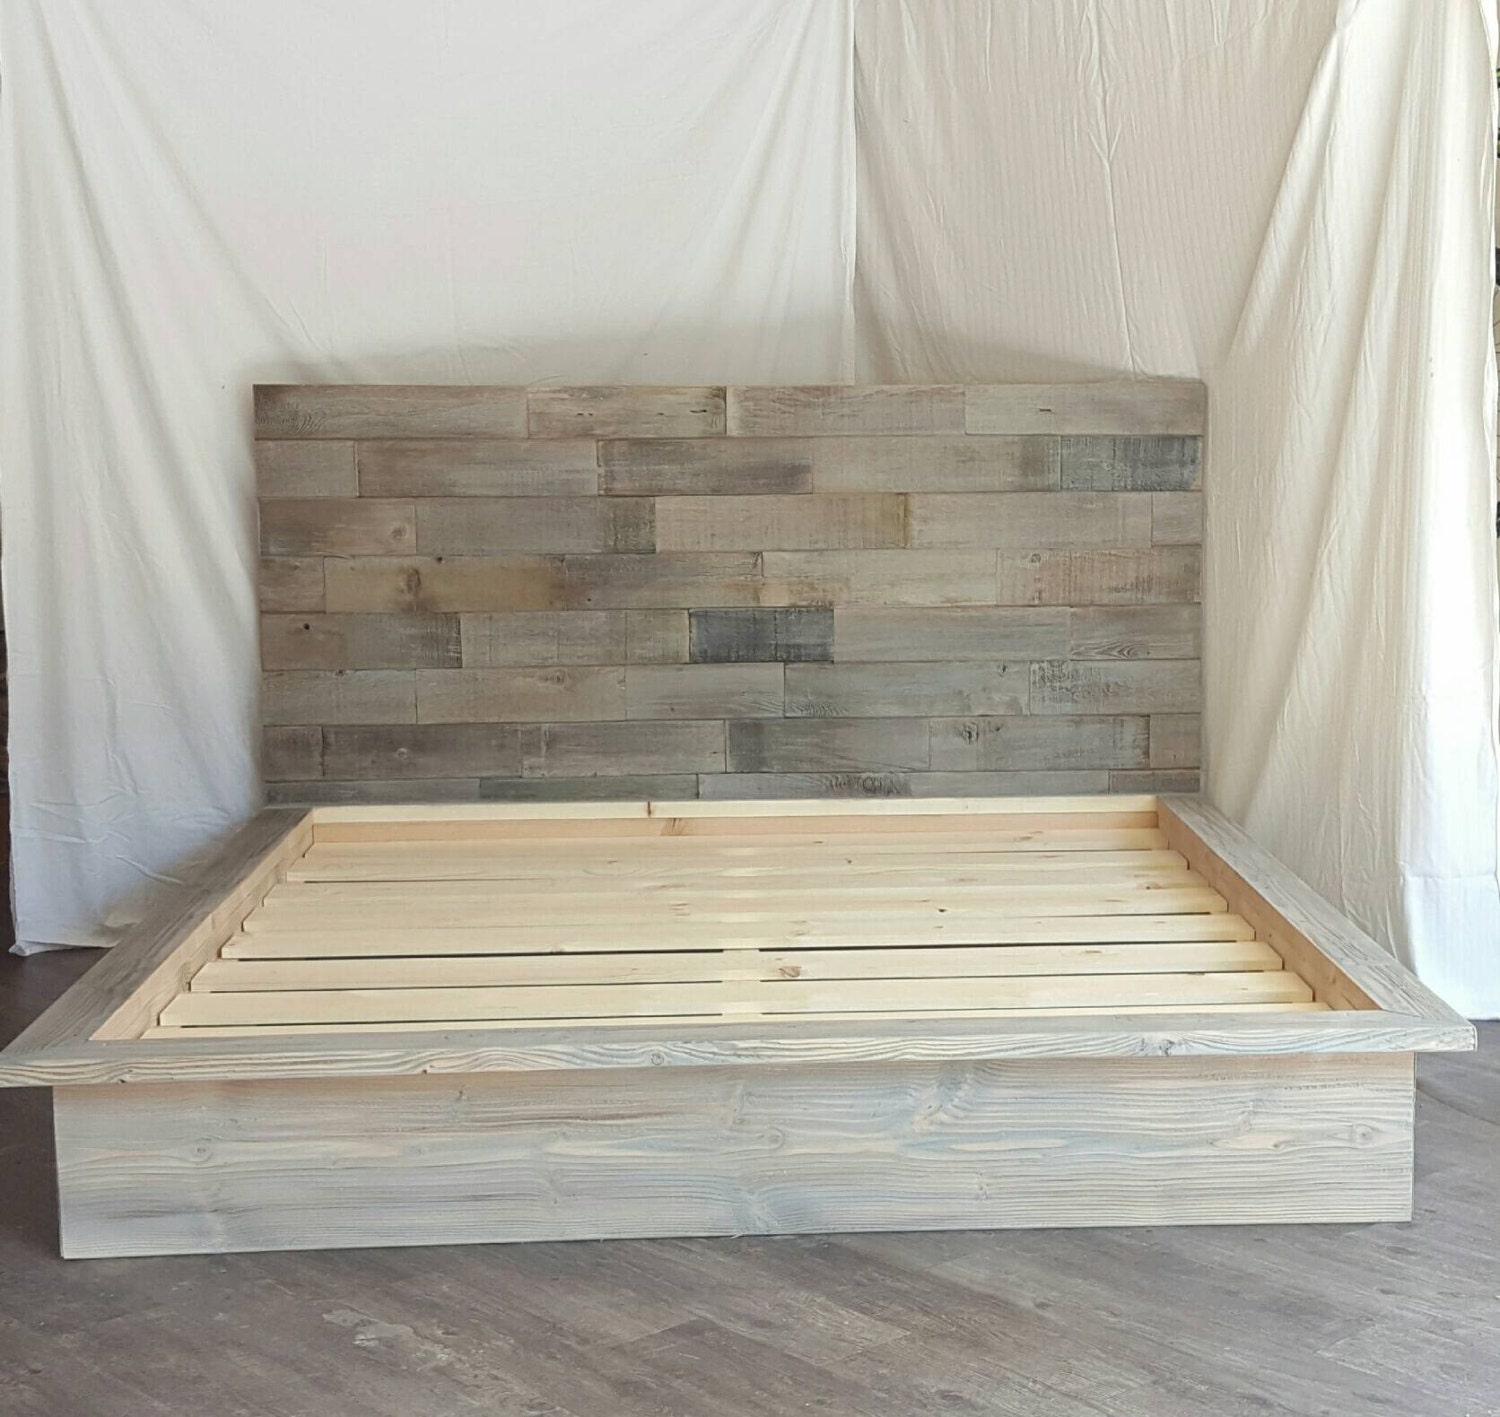 Steph grey driftwood finished platform bed with horizontal